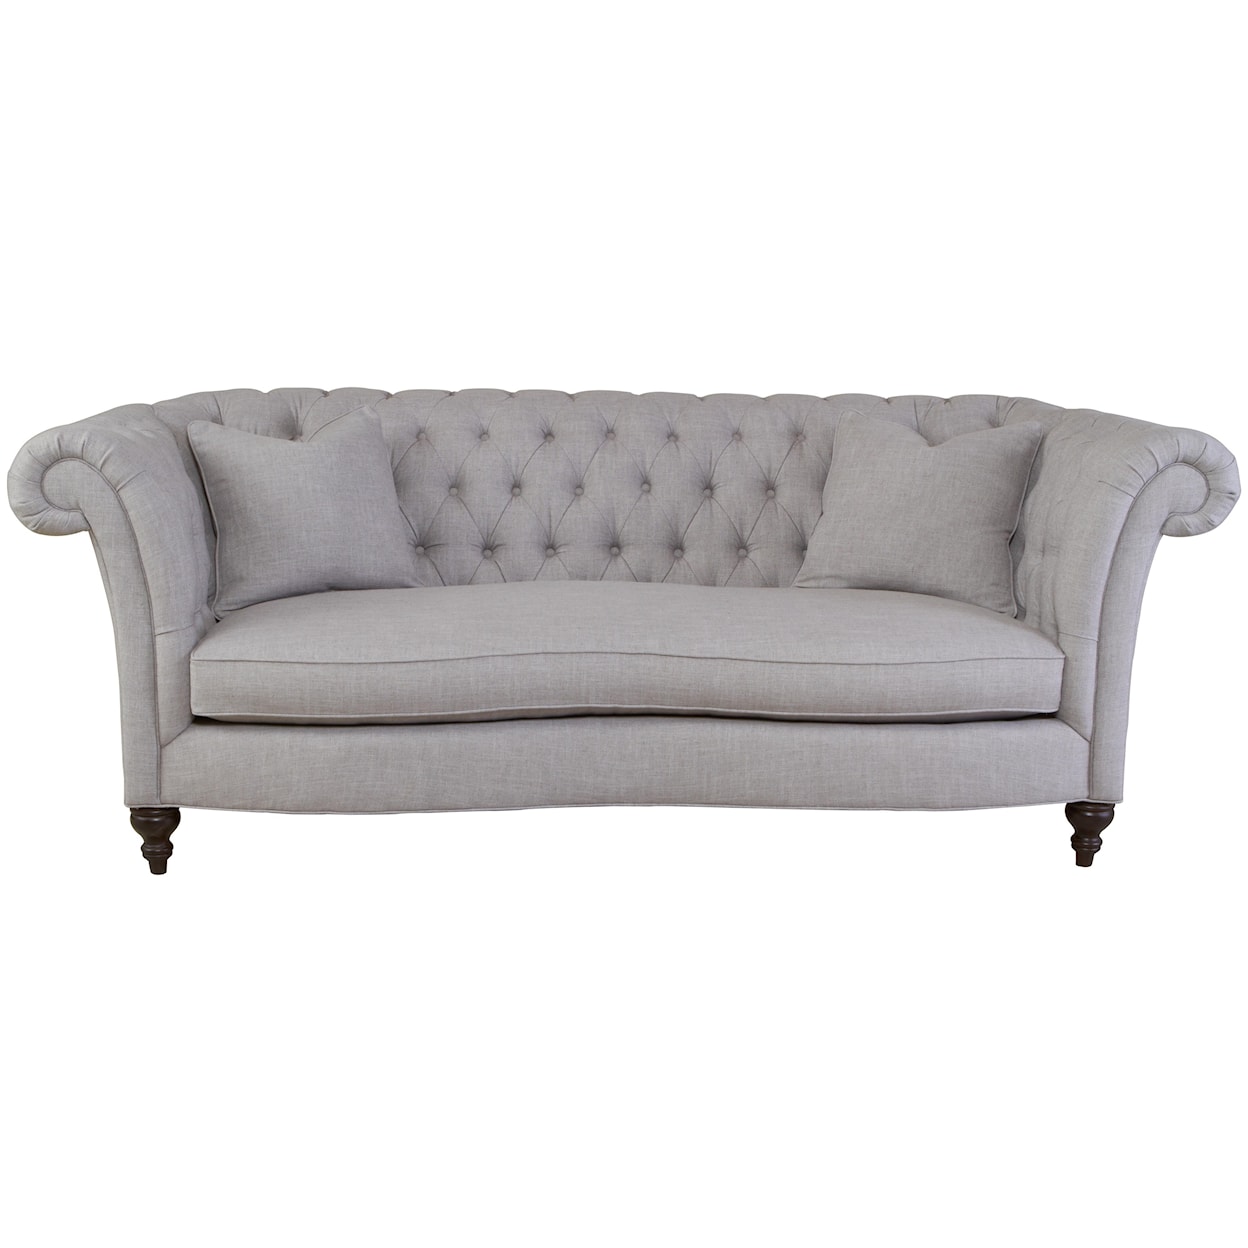 Southern Dulce Tuxedo Back Sofa with Tufting Detail